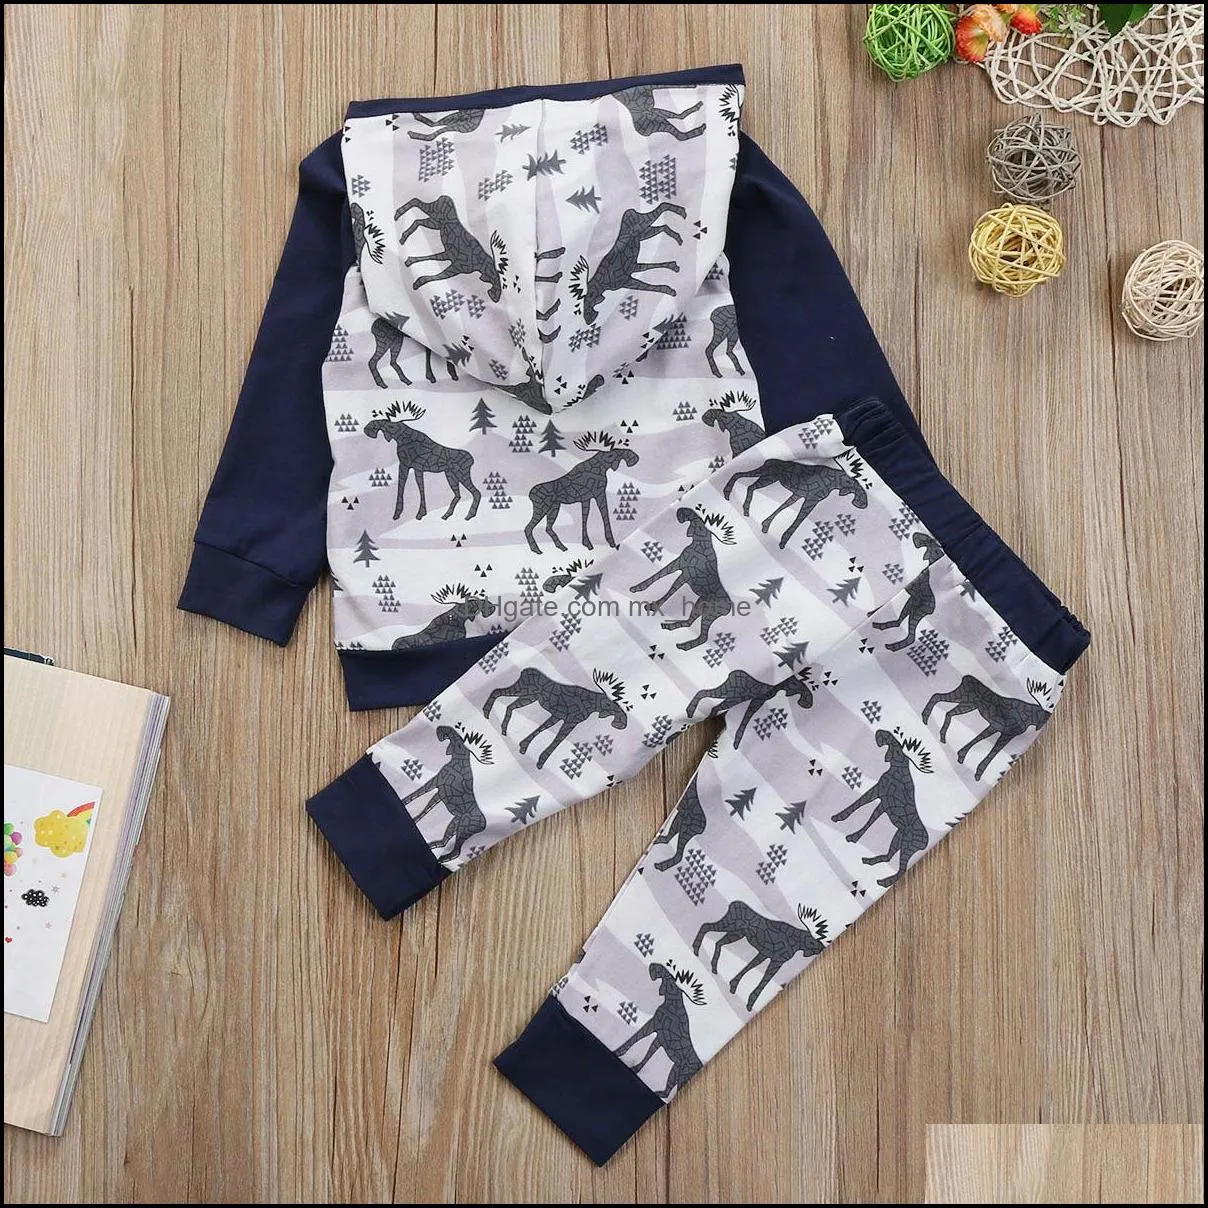 spring autumn infant baby kids clothes set boy girls deer printed hooded tops t-shirt   pants 2pcs children outfits sets mxhome